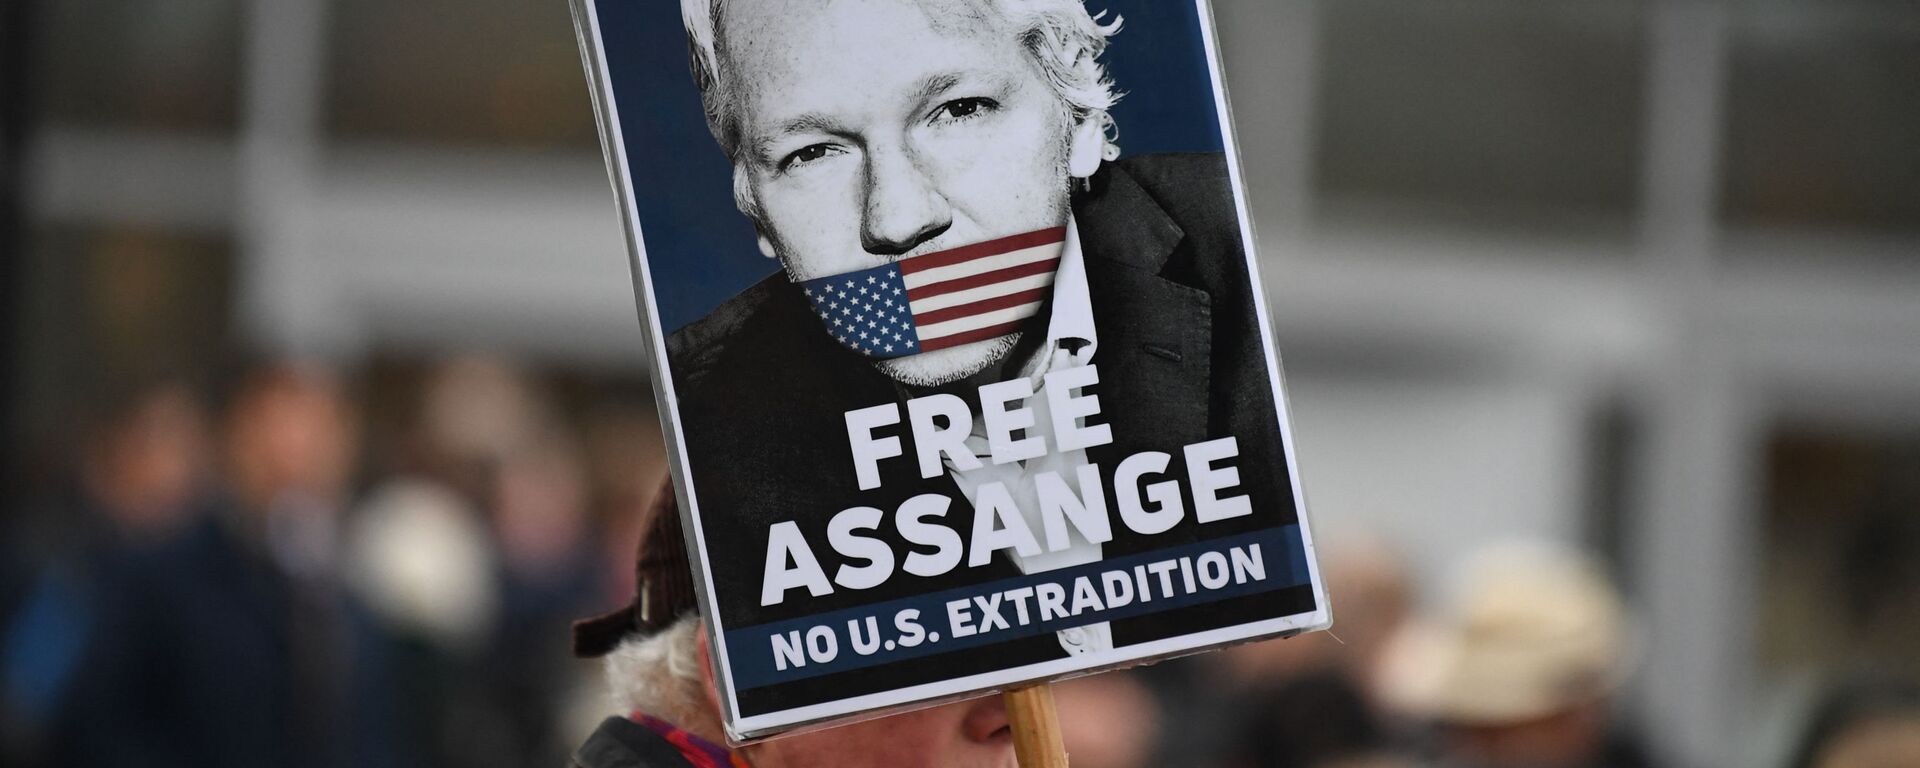 A supporter of WikiLeaks founder Julian Assange holds a placard calling for his freedom outside Woolwich Crown Court and HMP Belmarsh prison in southeast London on February 24, 2020, ahead of the opening of the trial to hear a US request for Assange's extradition - Sputnik International, 1920, 07.07.2021